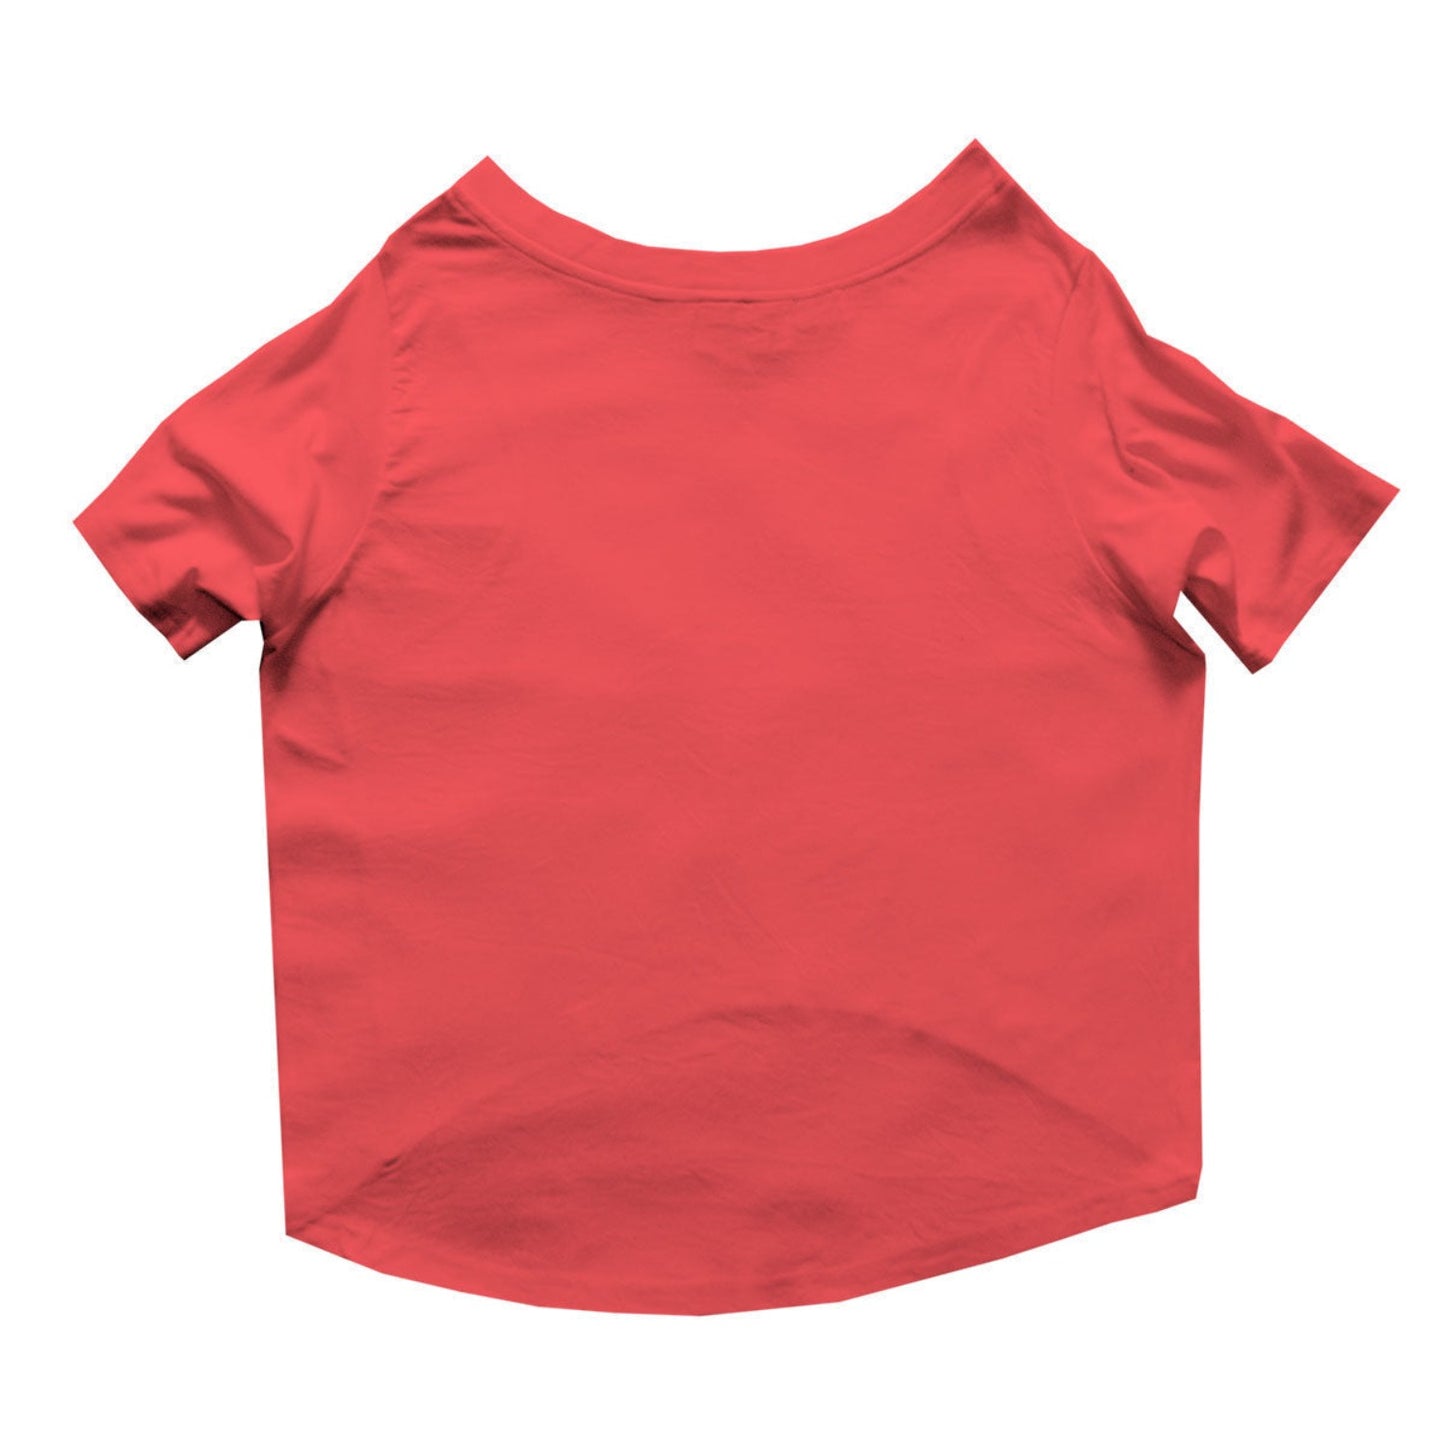 Ruse  / Poppy Red Ruse Basic Crew Neck "Let's Play" Printed Half Sleeves Dog Tee24